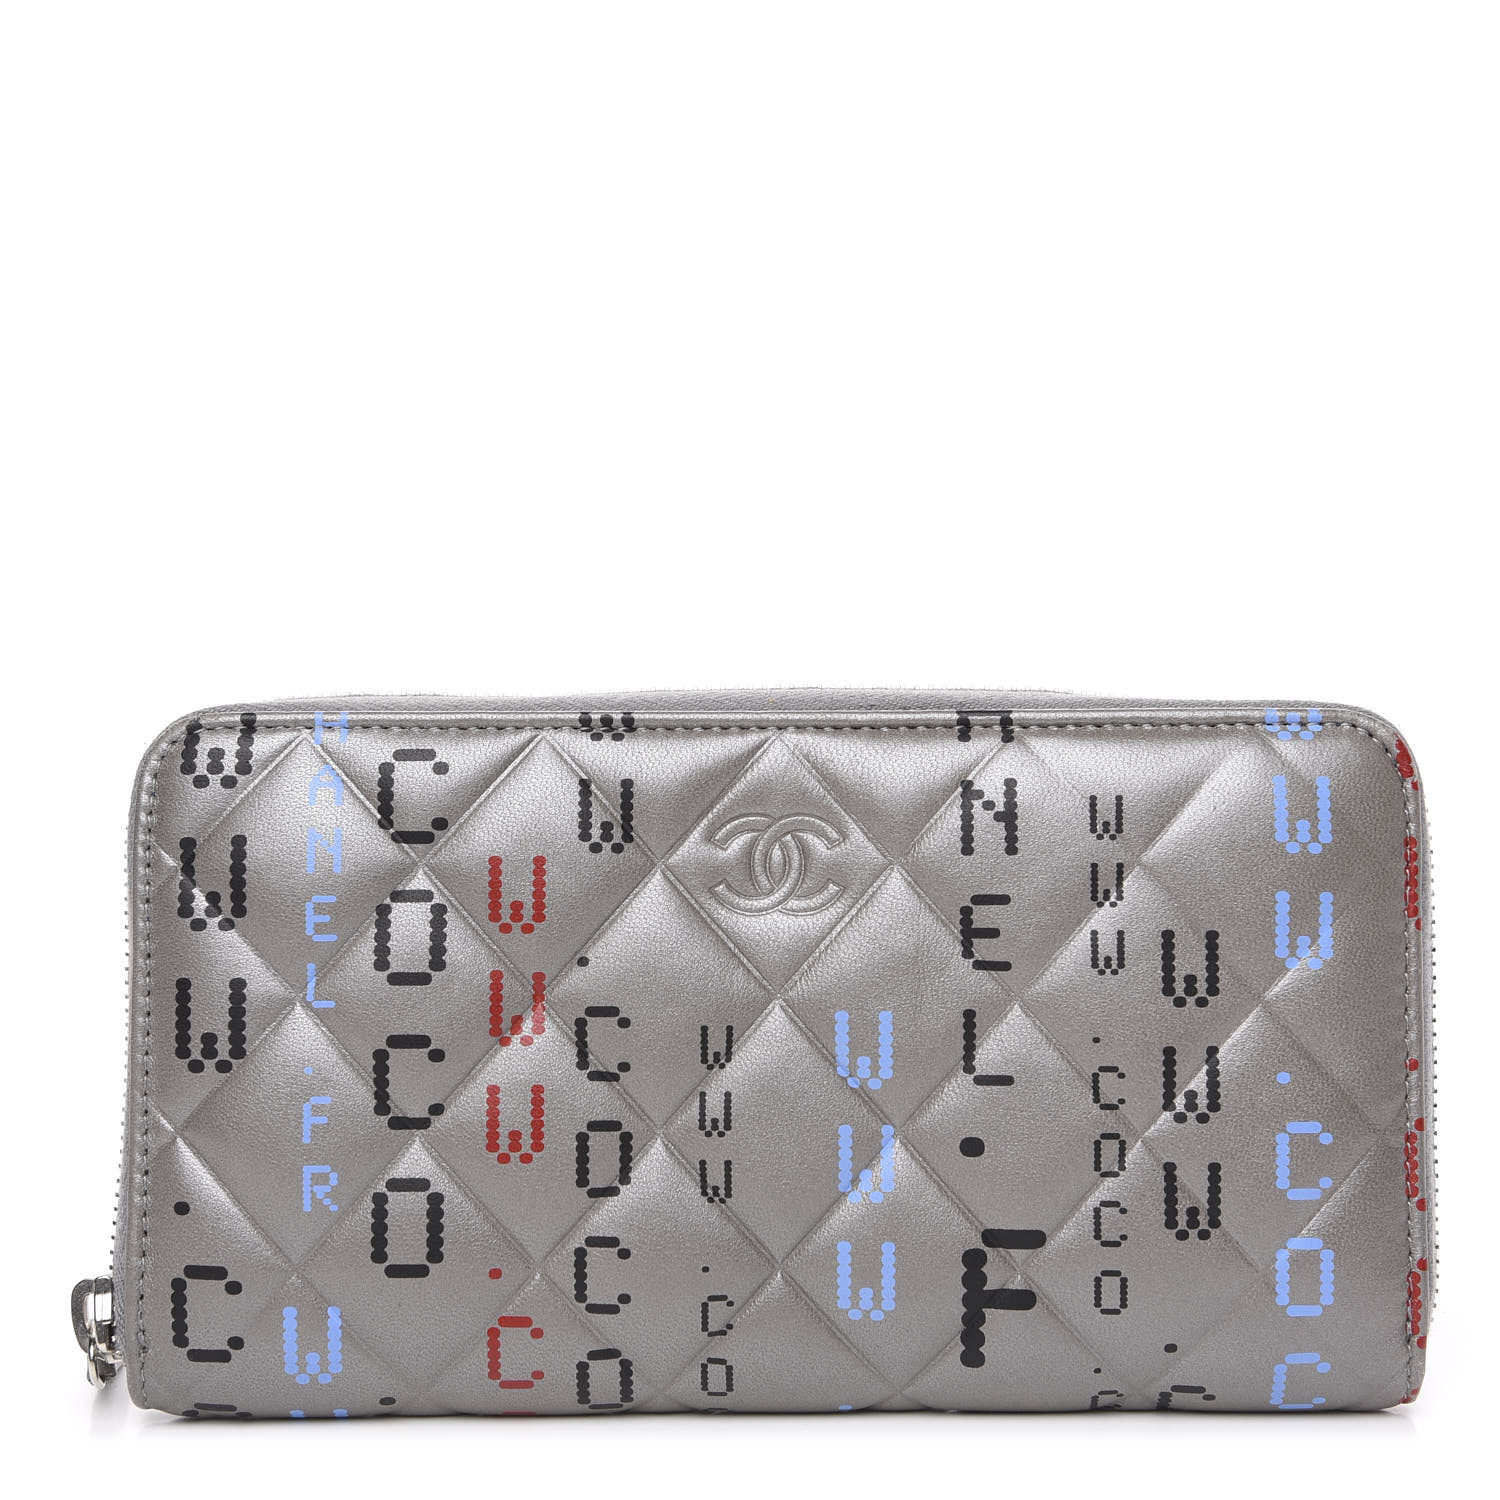 Chanel Metallic Lambskin Quilted Large Gusset Zip Around Wallet Silver Multicolor Fashionphile